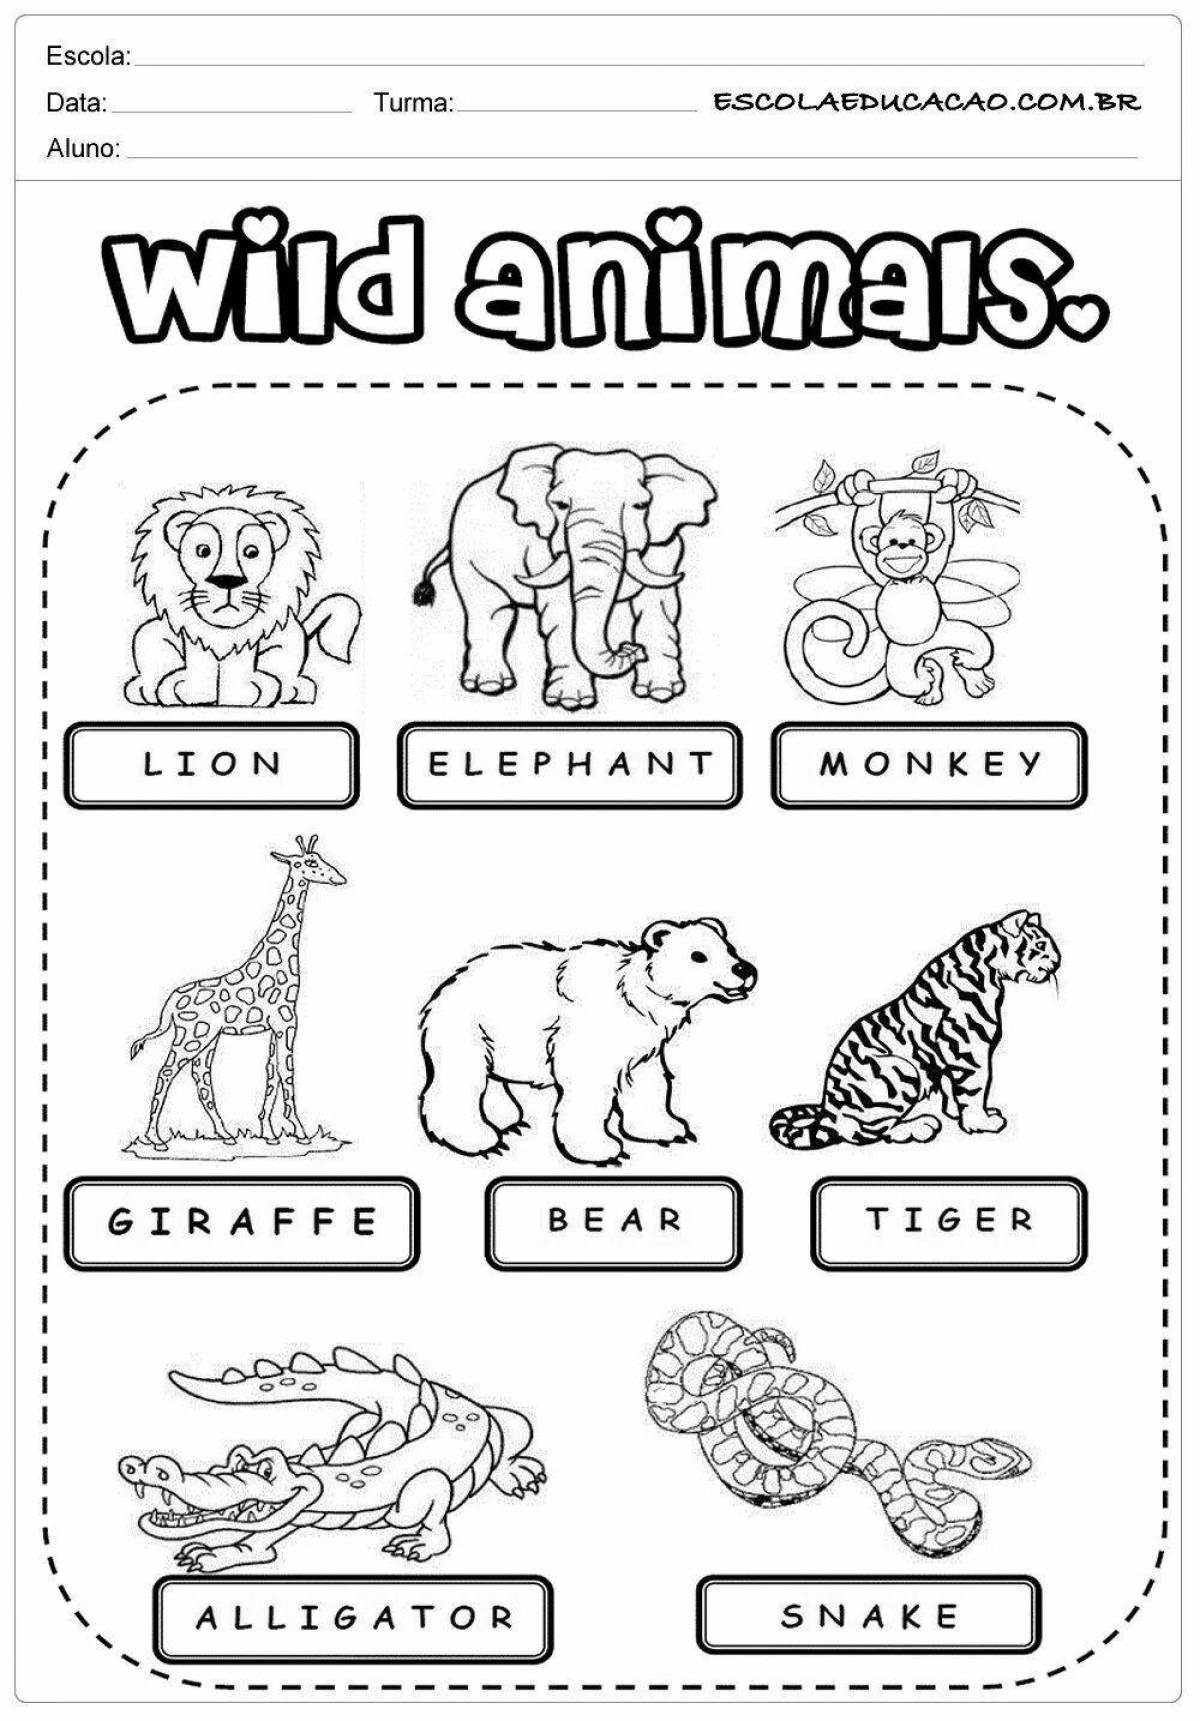 Fancy english animal coloring book for toddlers